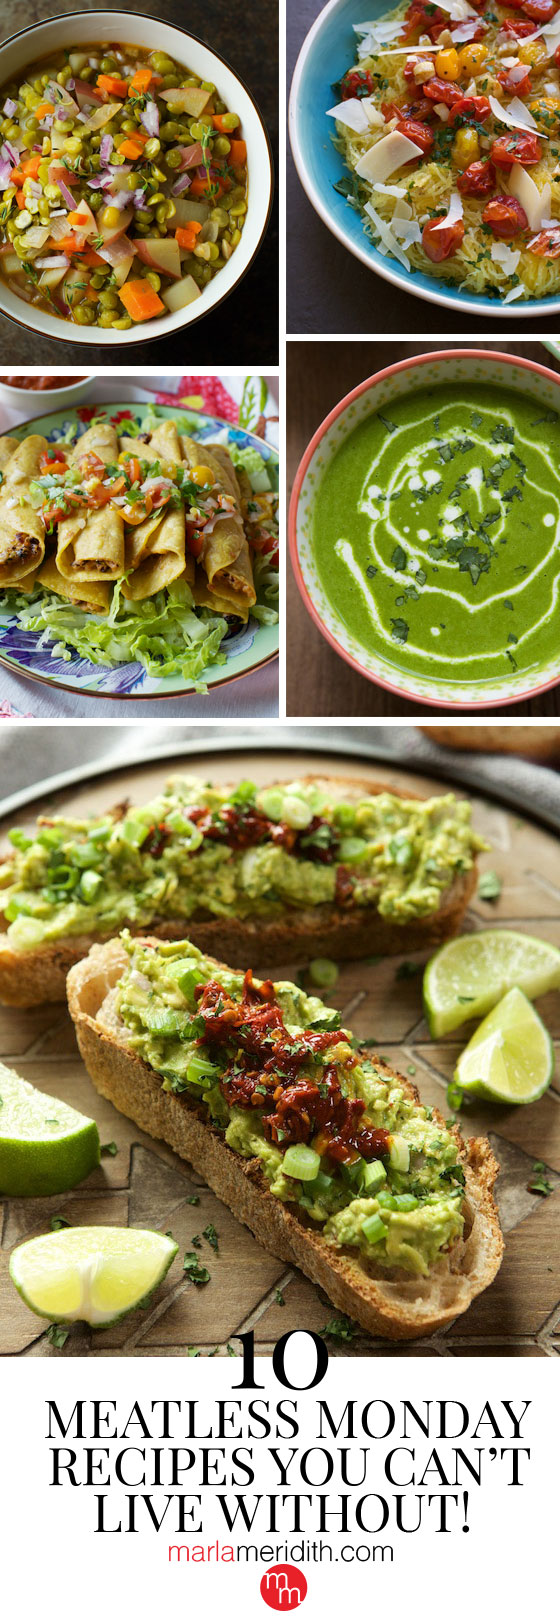 10 meatless monday recipes you can’t live without!